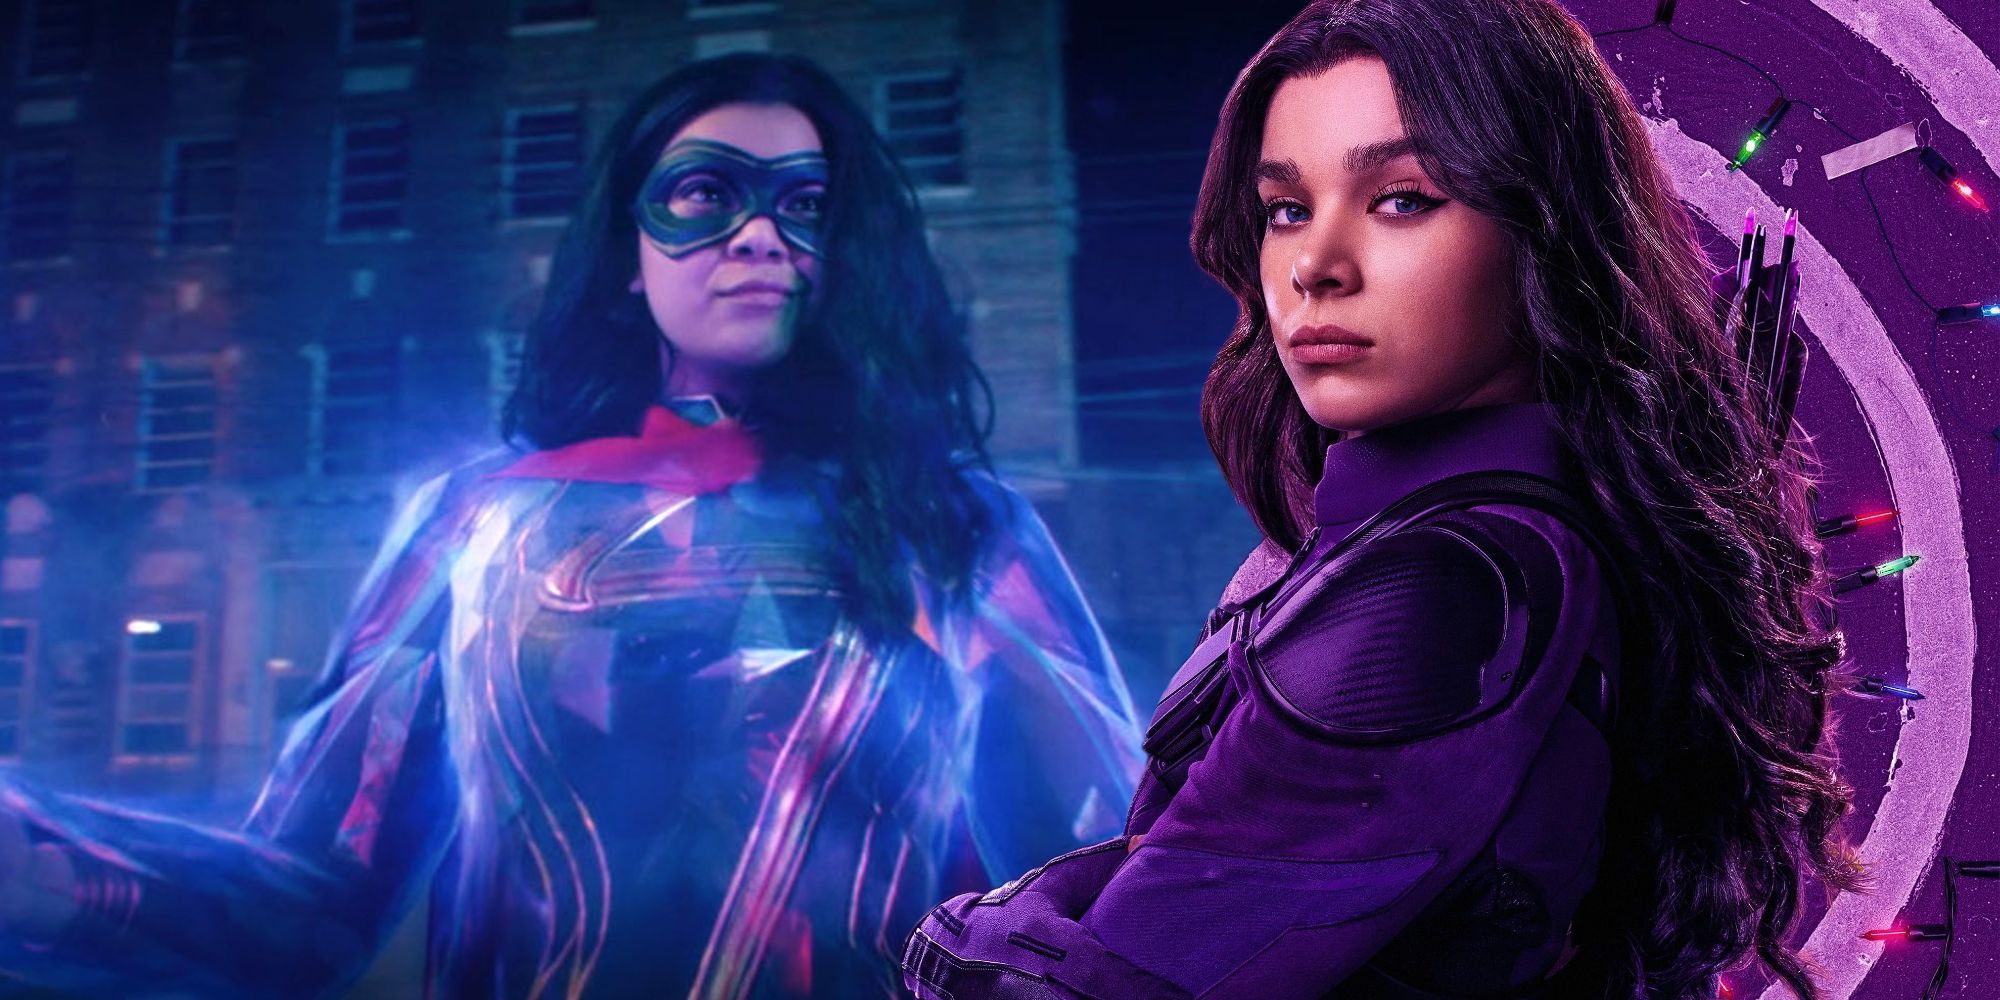 Hailee Steinfeld as Kate Bishop in her Hawkeye poster next to Iman Vellani as Ms. Marvel surrounding by blue energy